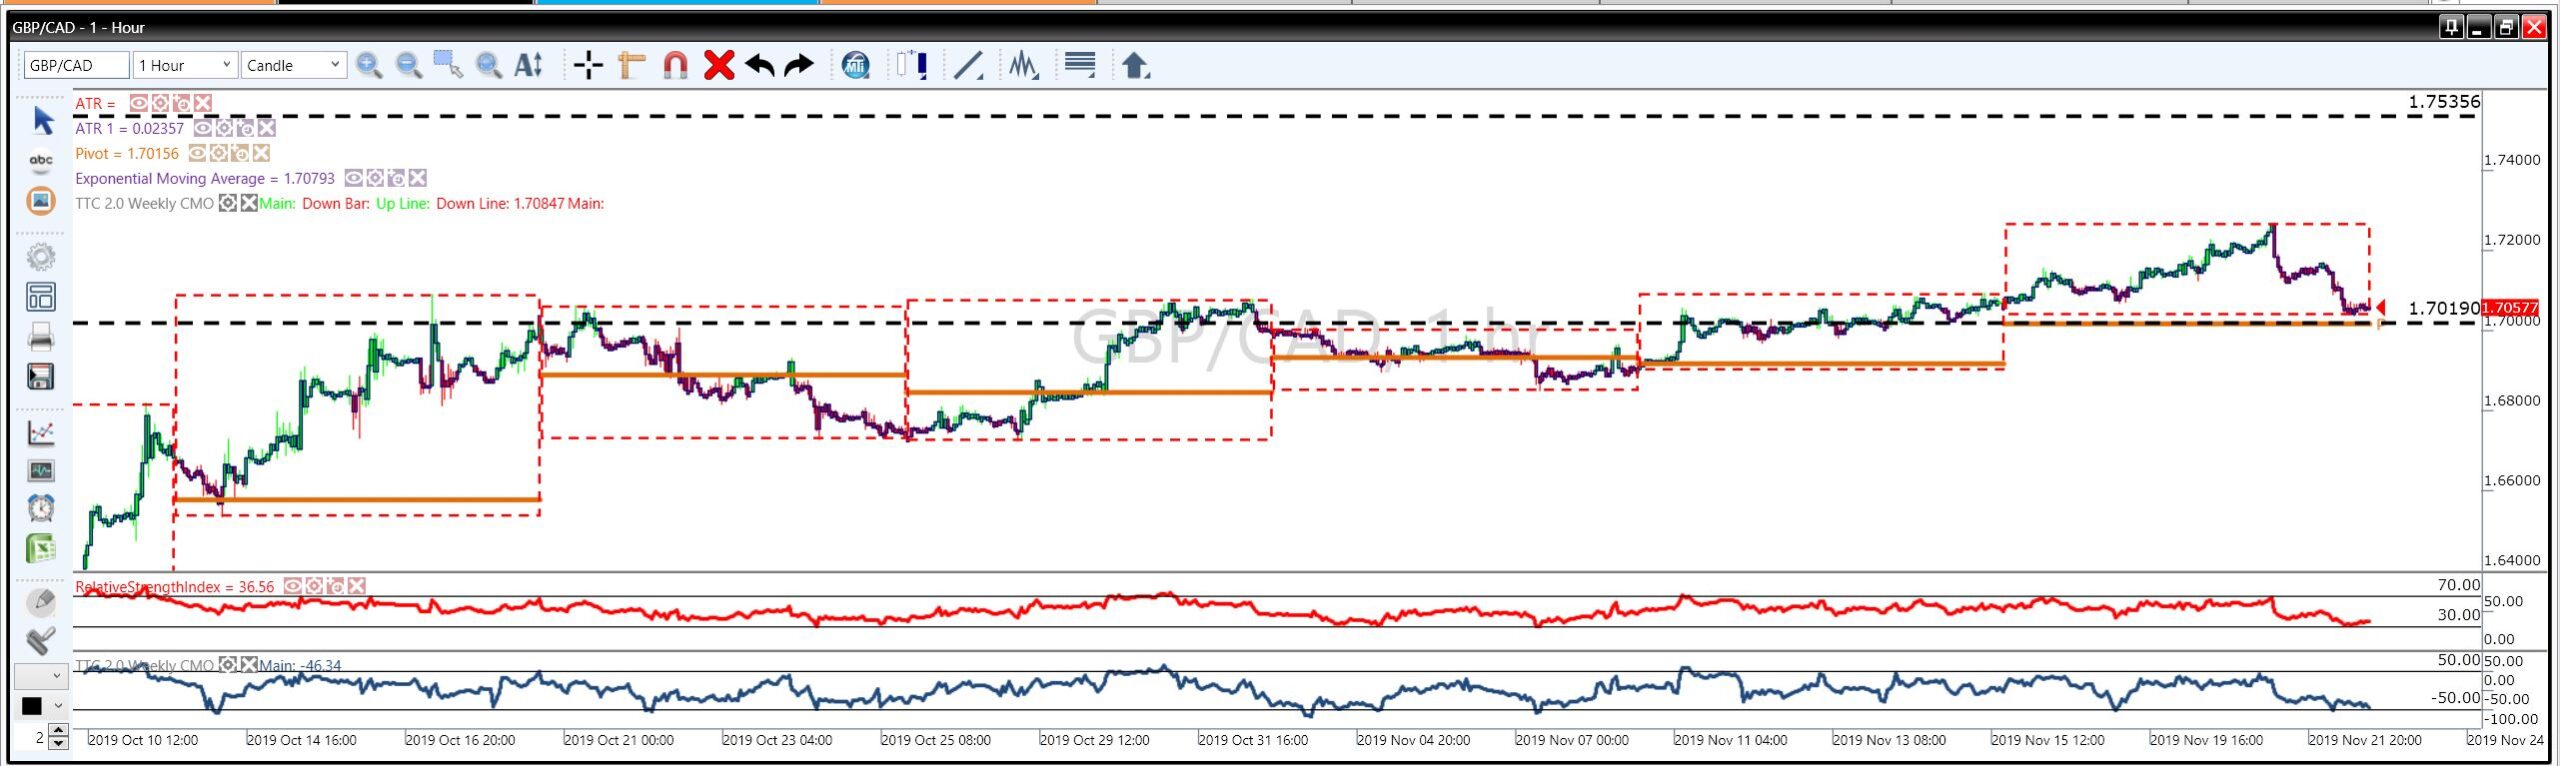 pivot points in trading shown on the GBP CAD charts